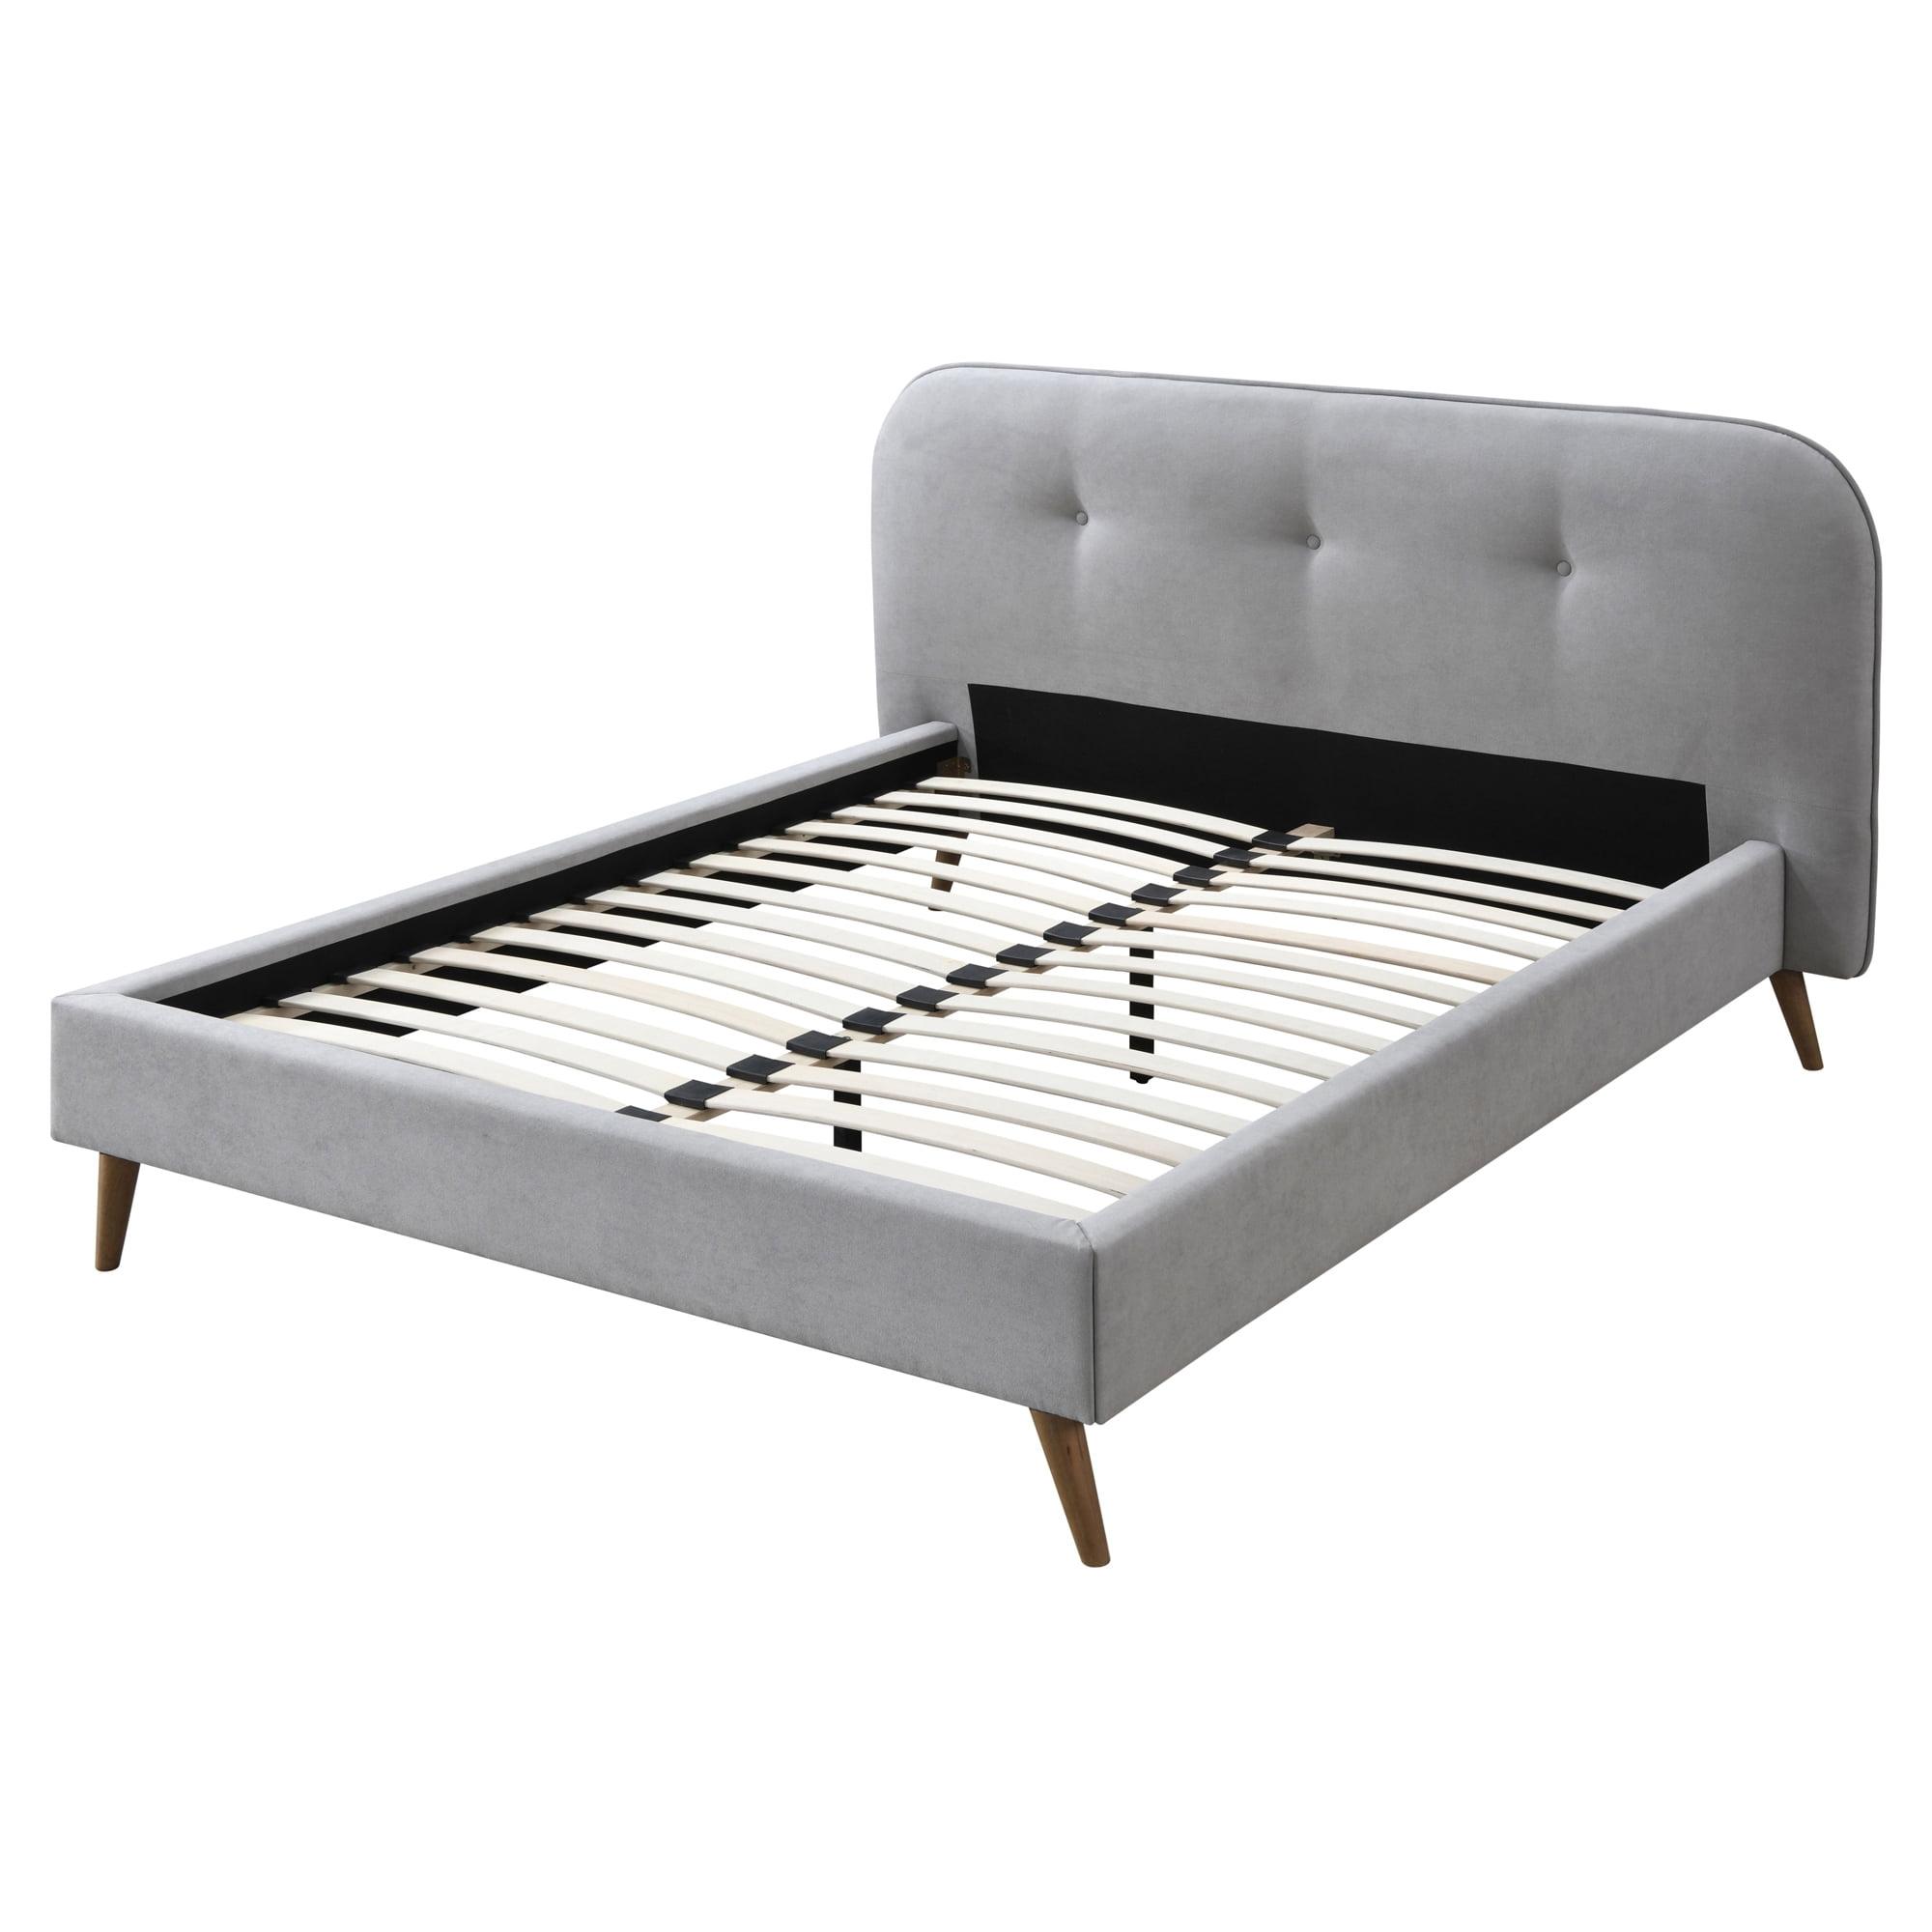 Graves Eastern King Bed with Tufted Gray Upholstery and Wood Accents